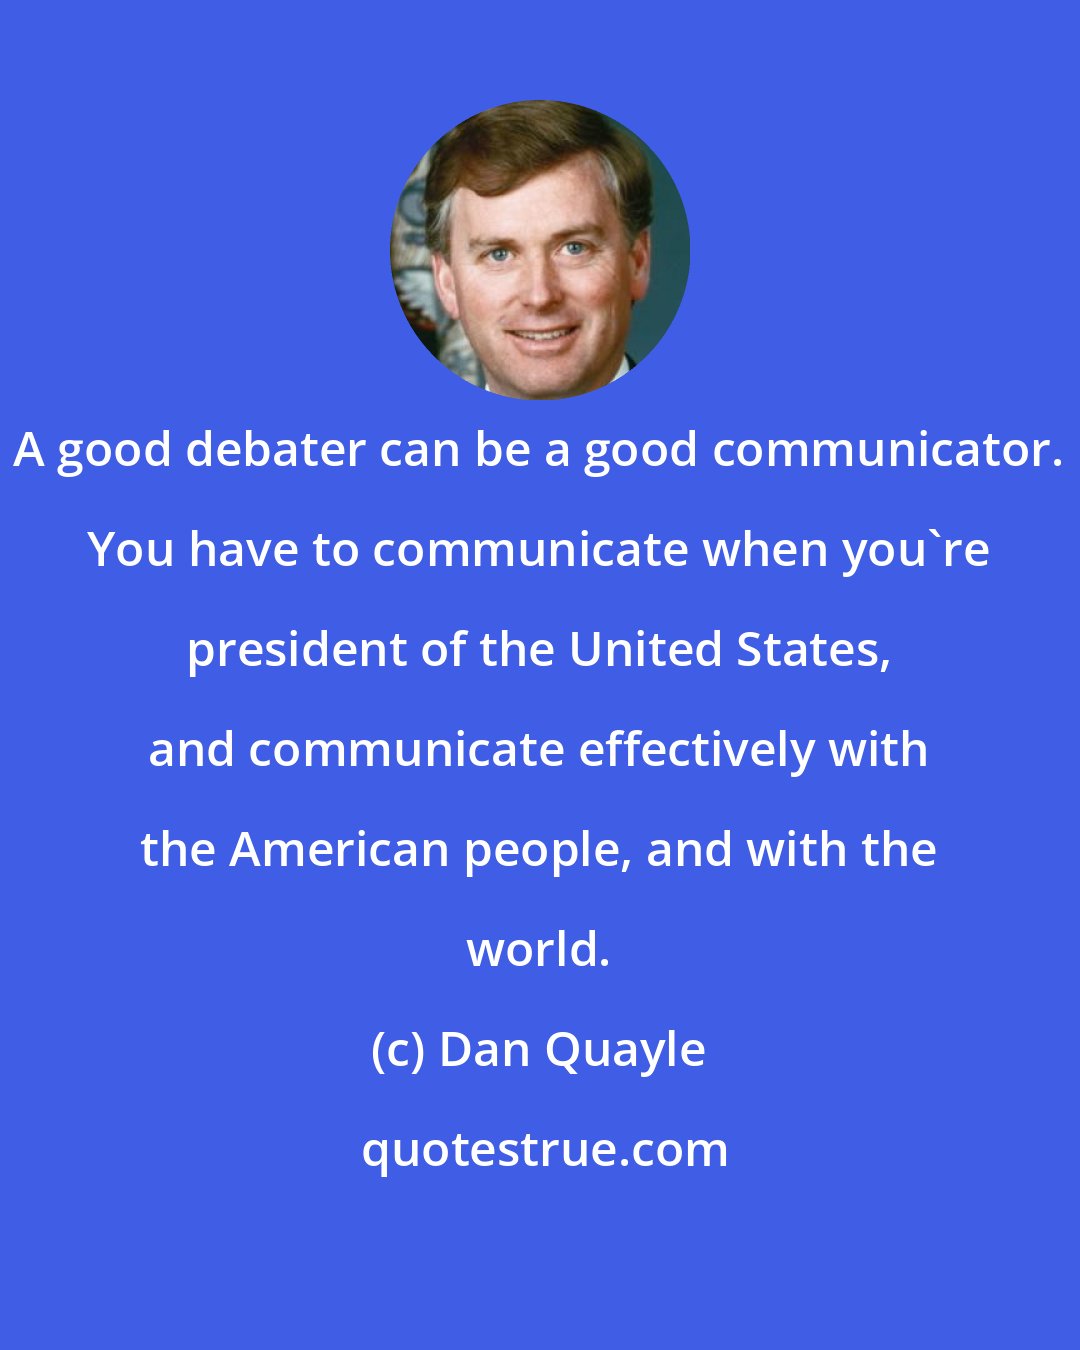 Dan Quayle: A good debater can be a good communicator. You have to communicate when you're president of the United States, and communicate effectively with the American people, and with the world.